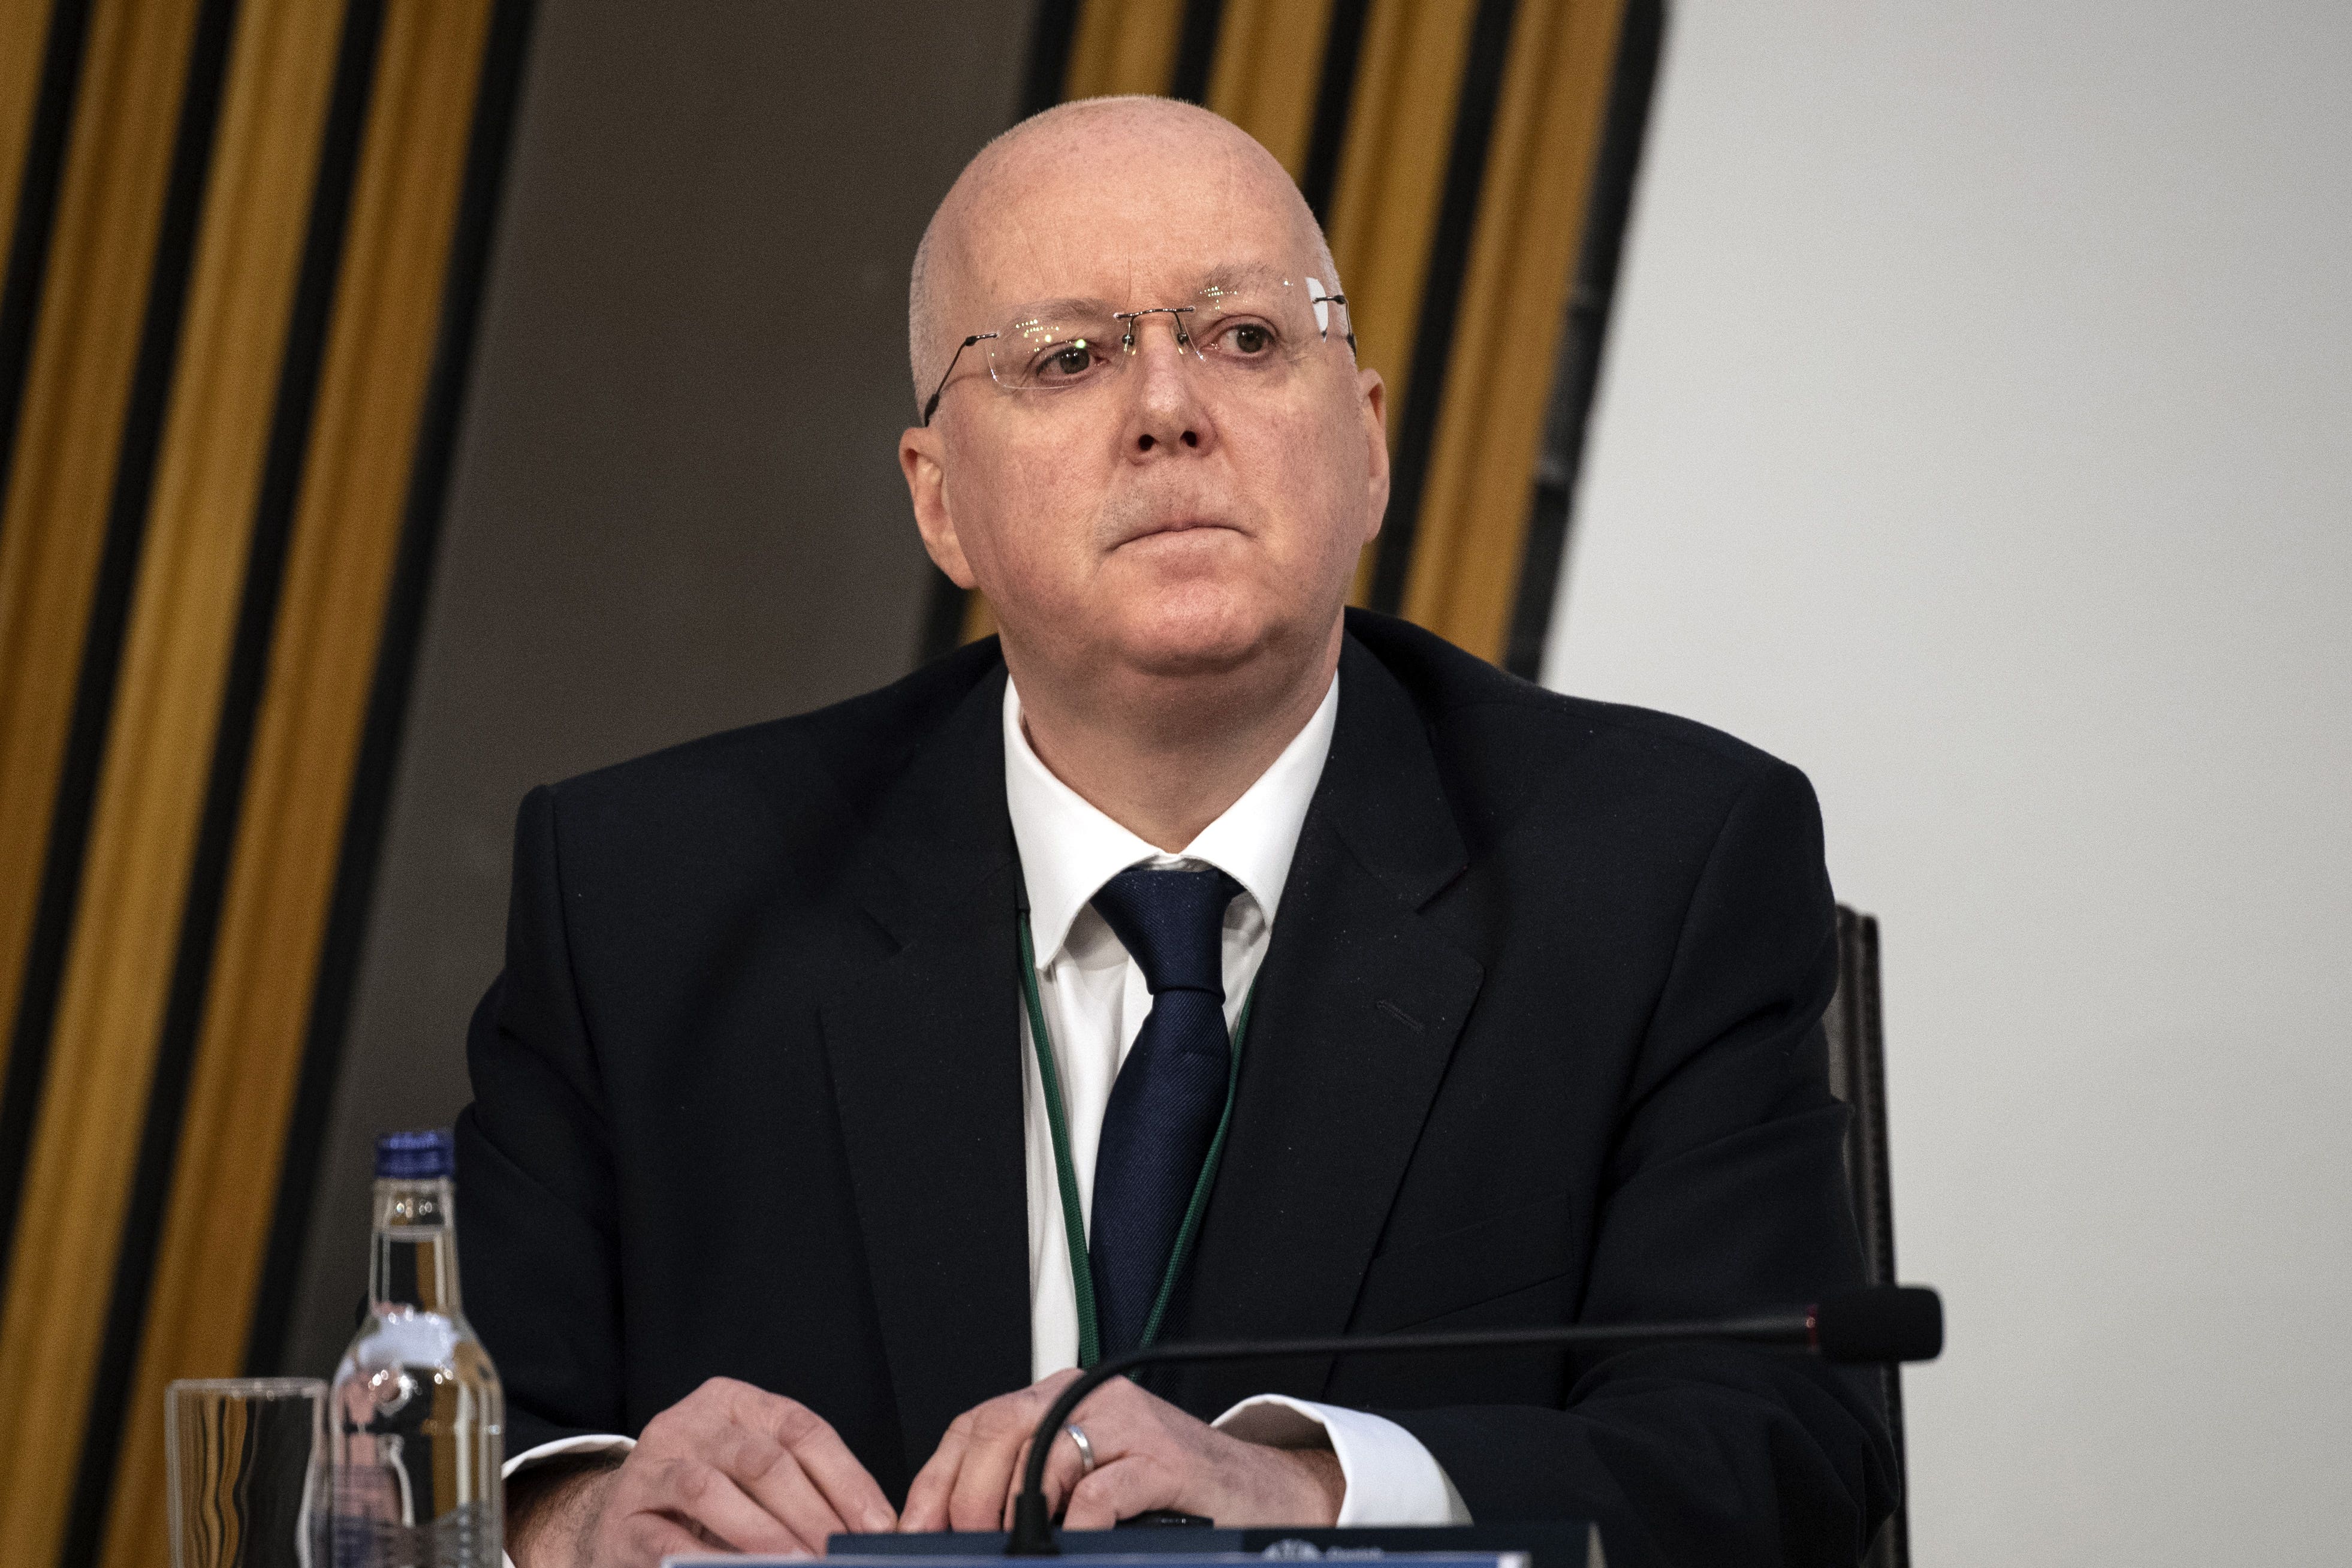 The SNP is looking to recruit a new chief executive to take the place of Peter Murrell, who quit the post last month and was later arrested by Police Scotland, before being released without charge (Andy Buchanan/PA)